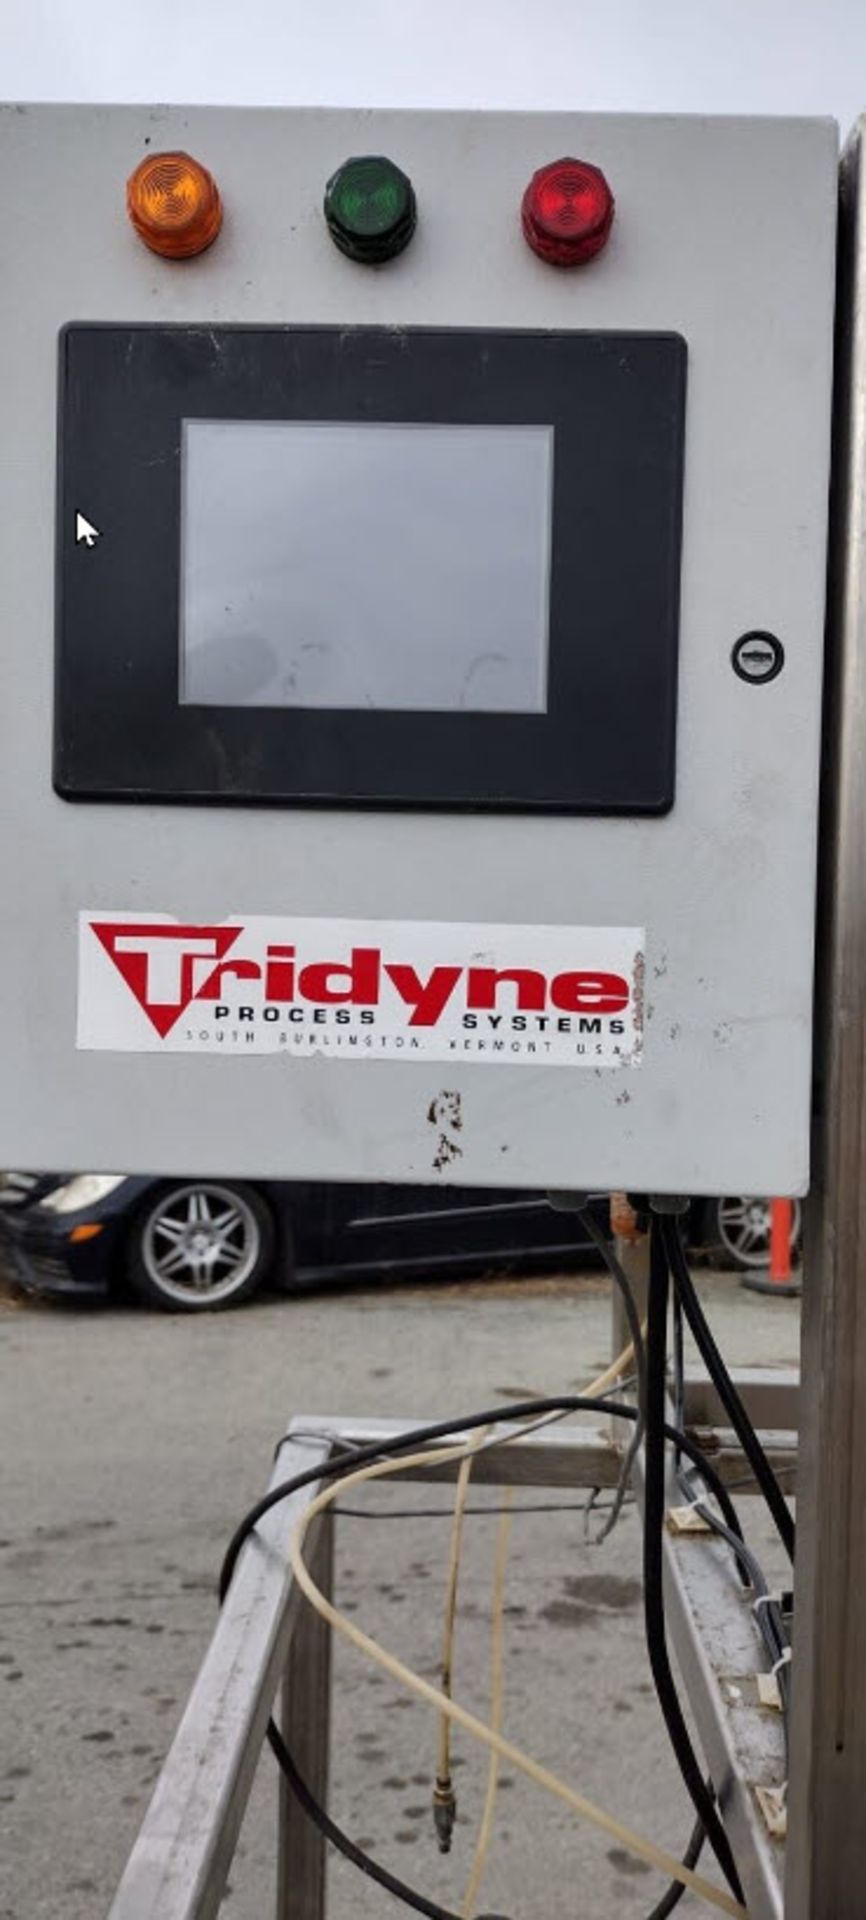 (Located in Hollister, CA) Tridyne Vibratory Feeder System Model F-100 Style, Rigging Fee: $100 - Image 3 of 6